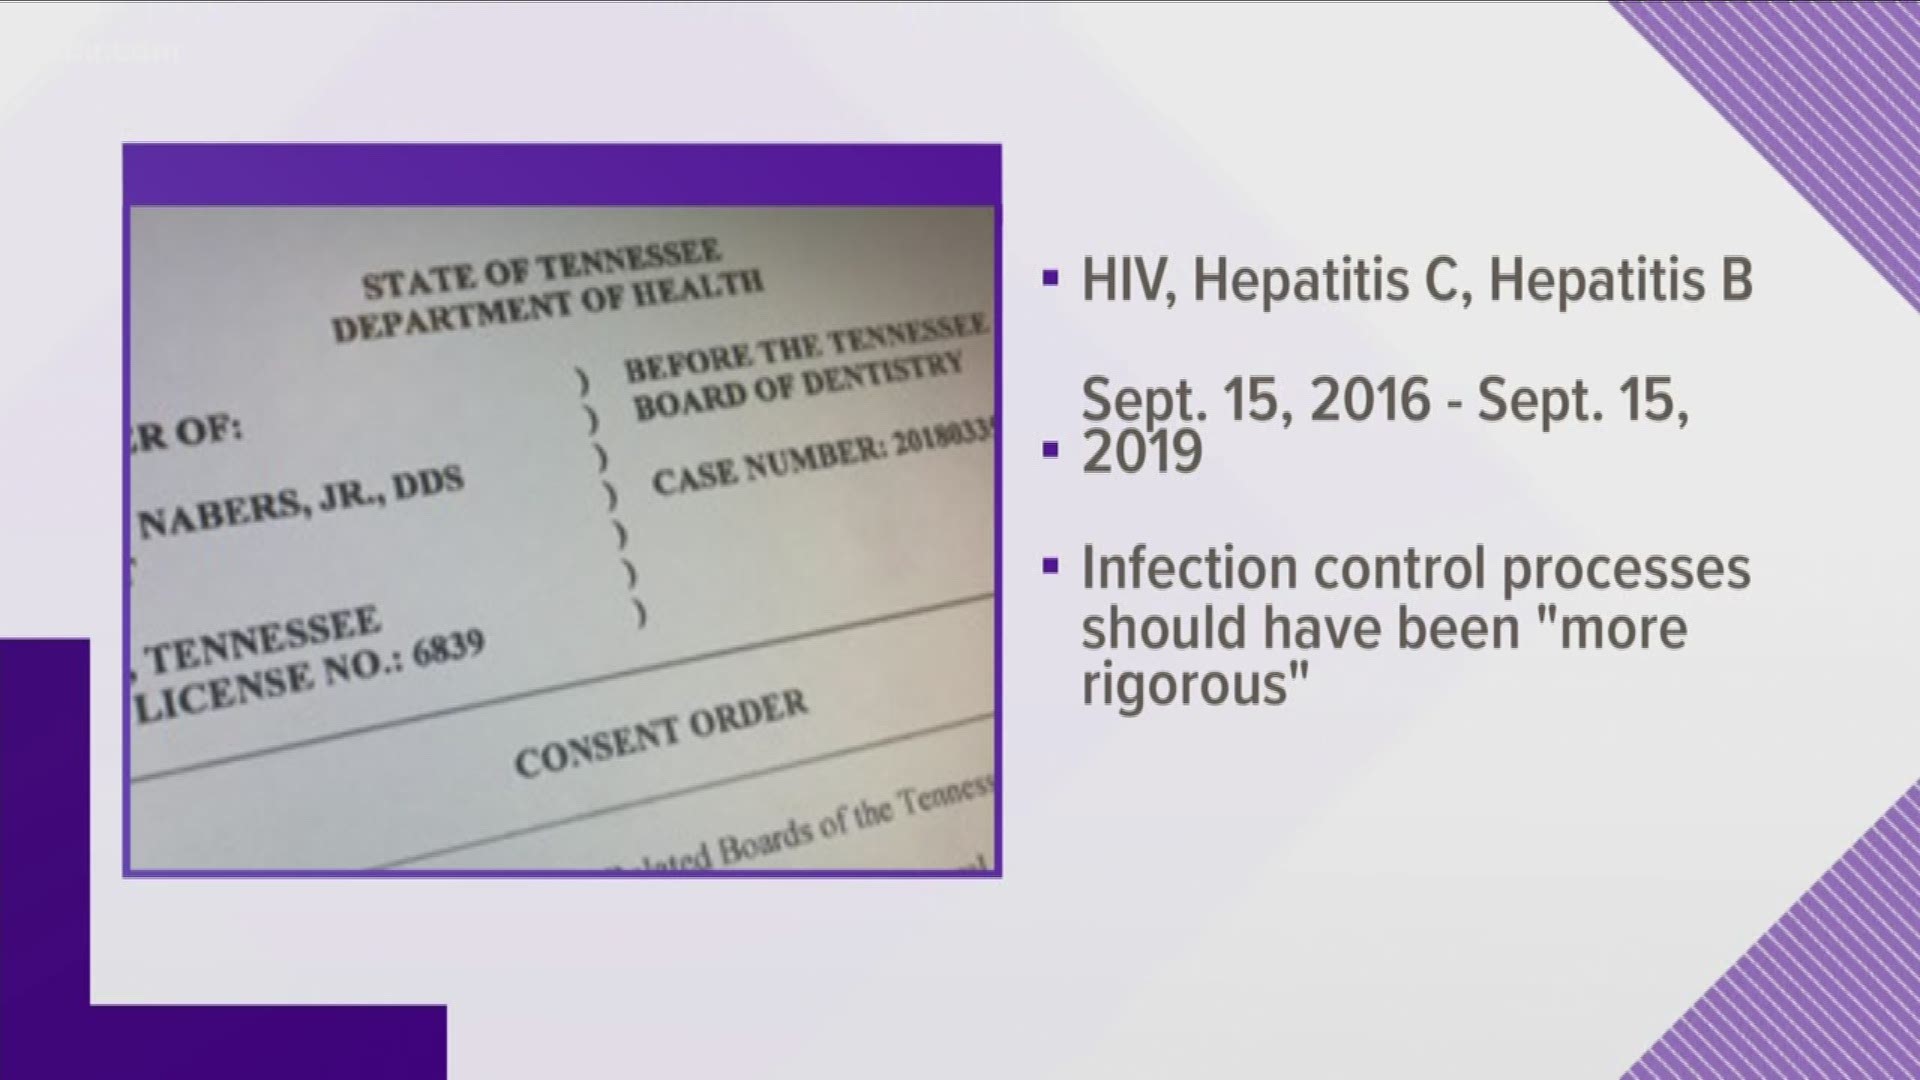 A Knoxville dentist sent a letter to his patients warning they may have been exposed to HIV, Hepatitis C or B.